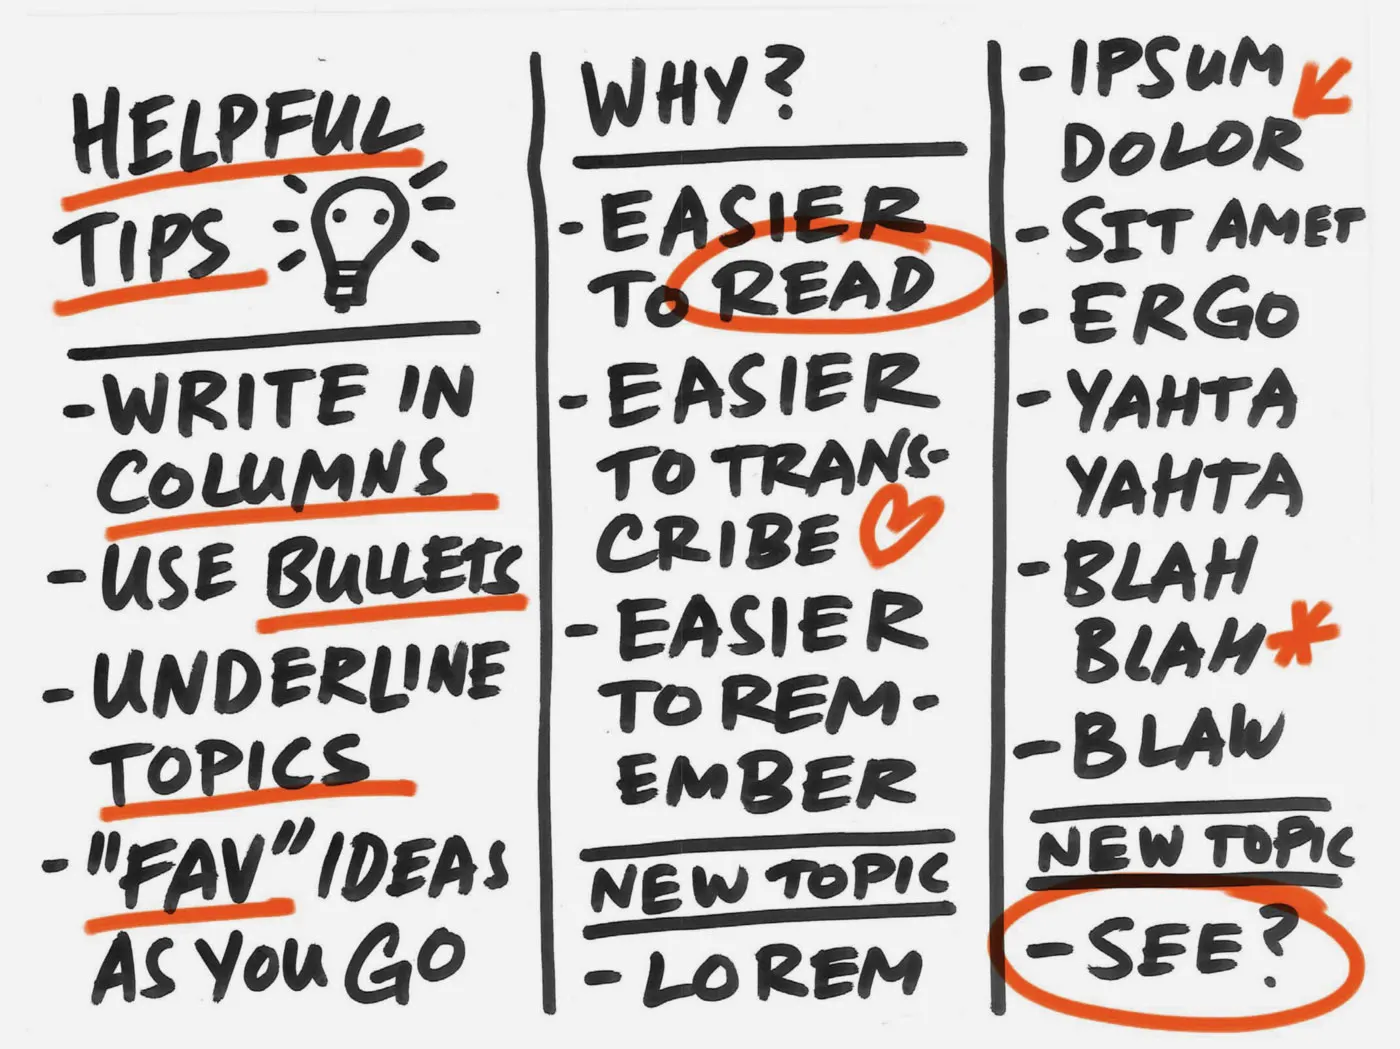 Black marker sketch divided into three columns. Left: Helpful tips. Write in columns. Use bullets. Underline topics. Favorite ideas as you go. Middle: Why? Easier to read, transcribe, remember. Right: lorem ipsum text.